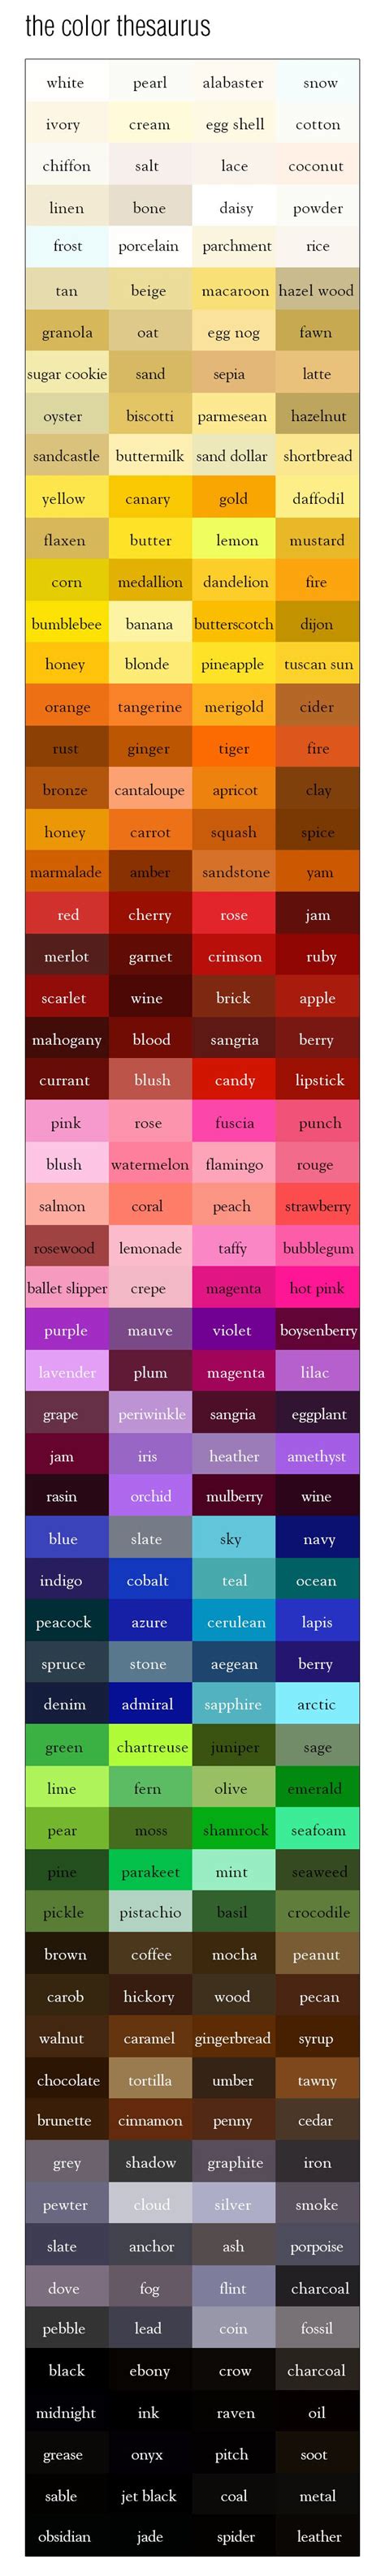 Cool Color Thesaurus 240 Colors And Names On An Infographic